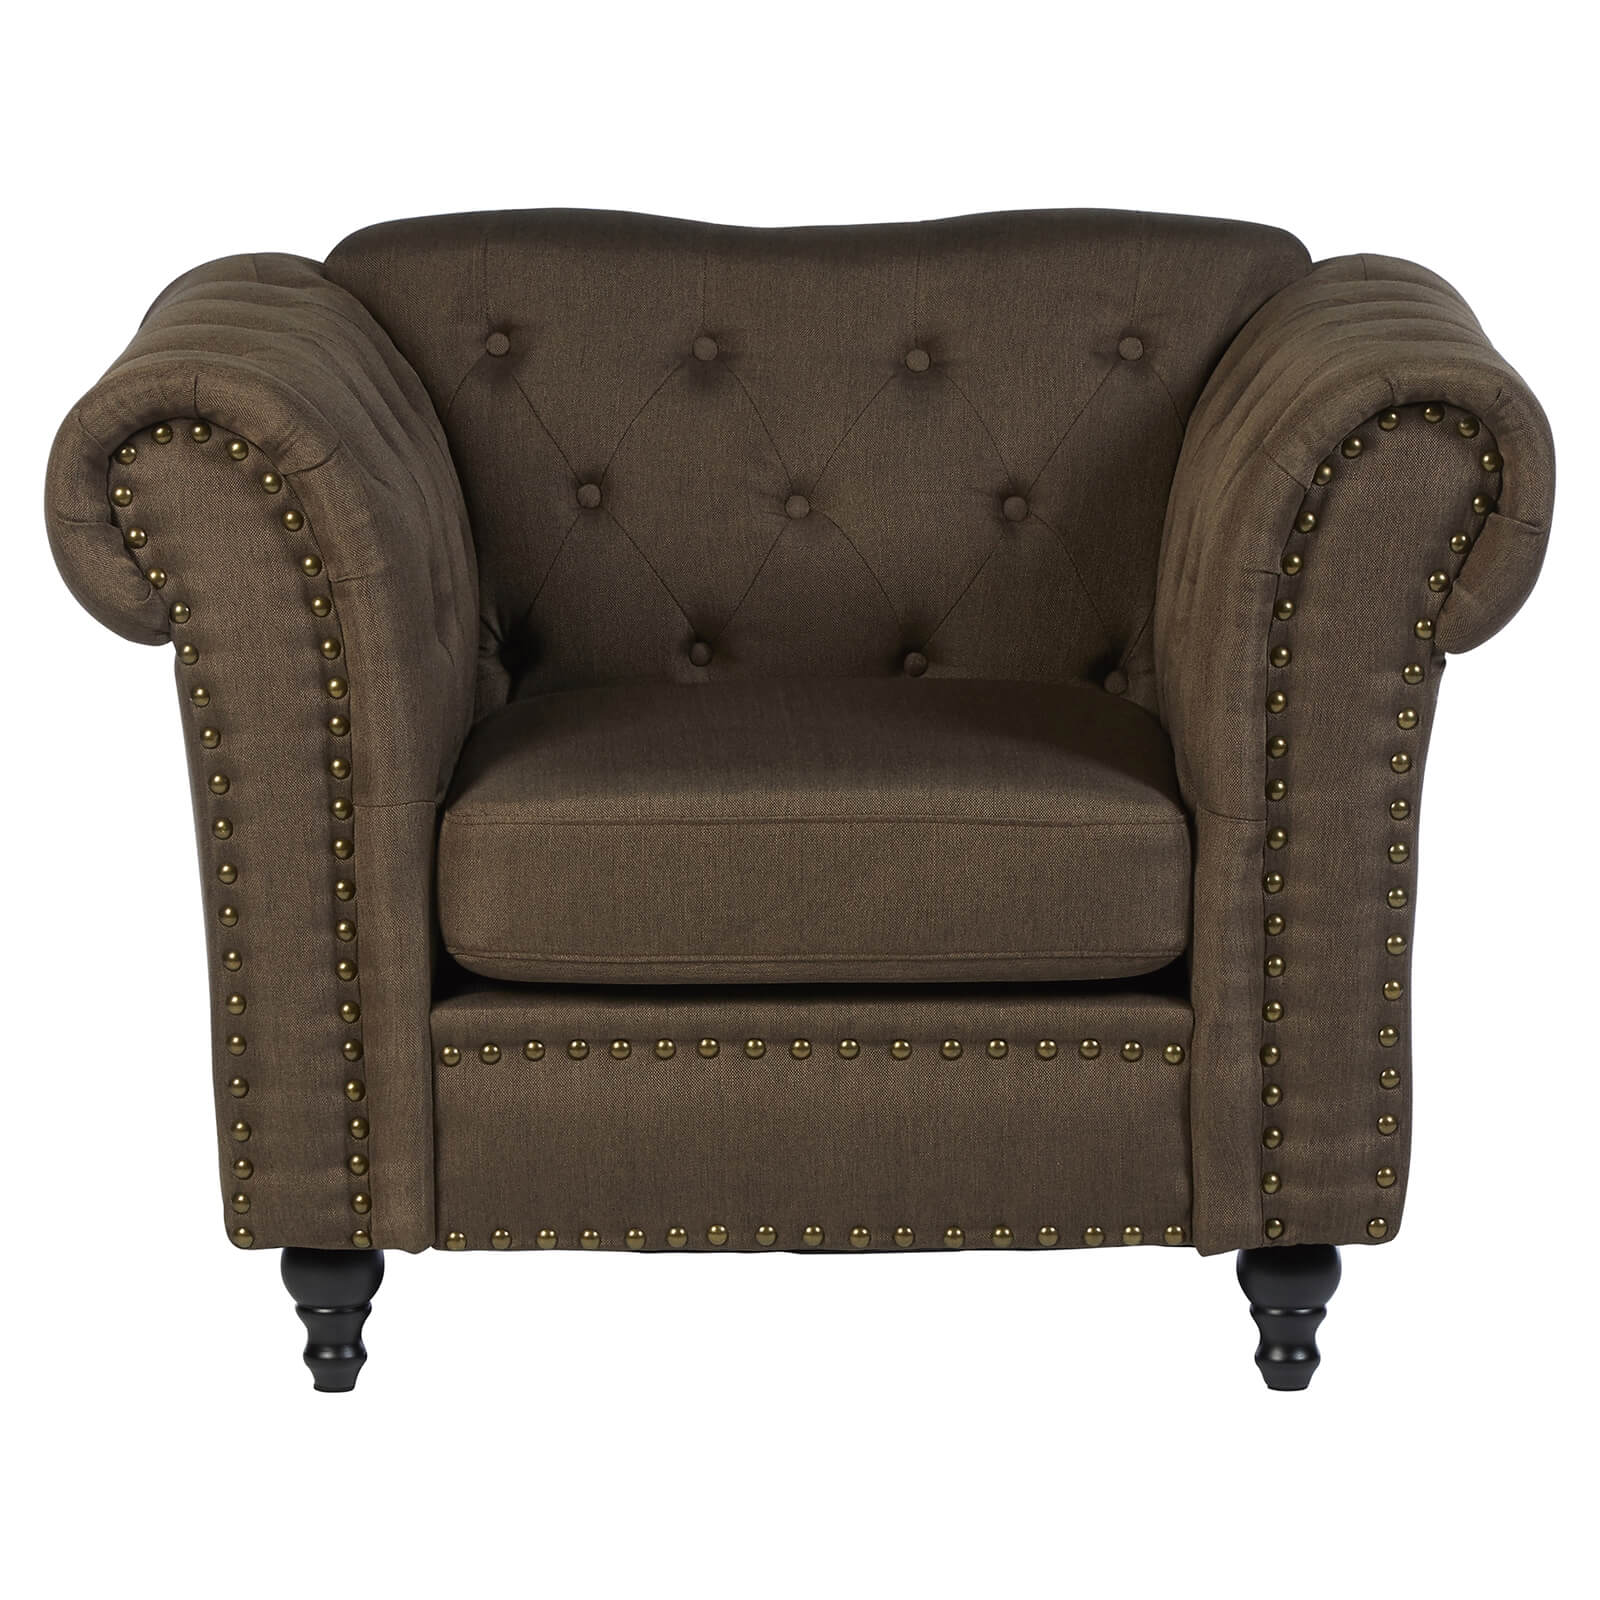 Fable Chesterfield Armchair - Natural